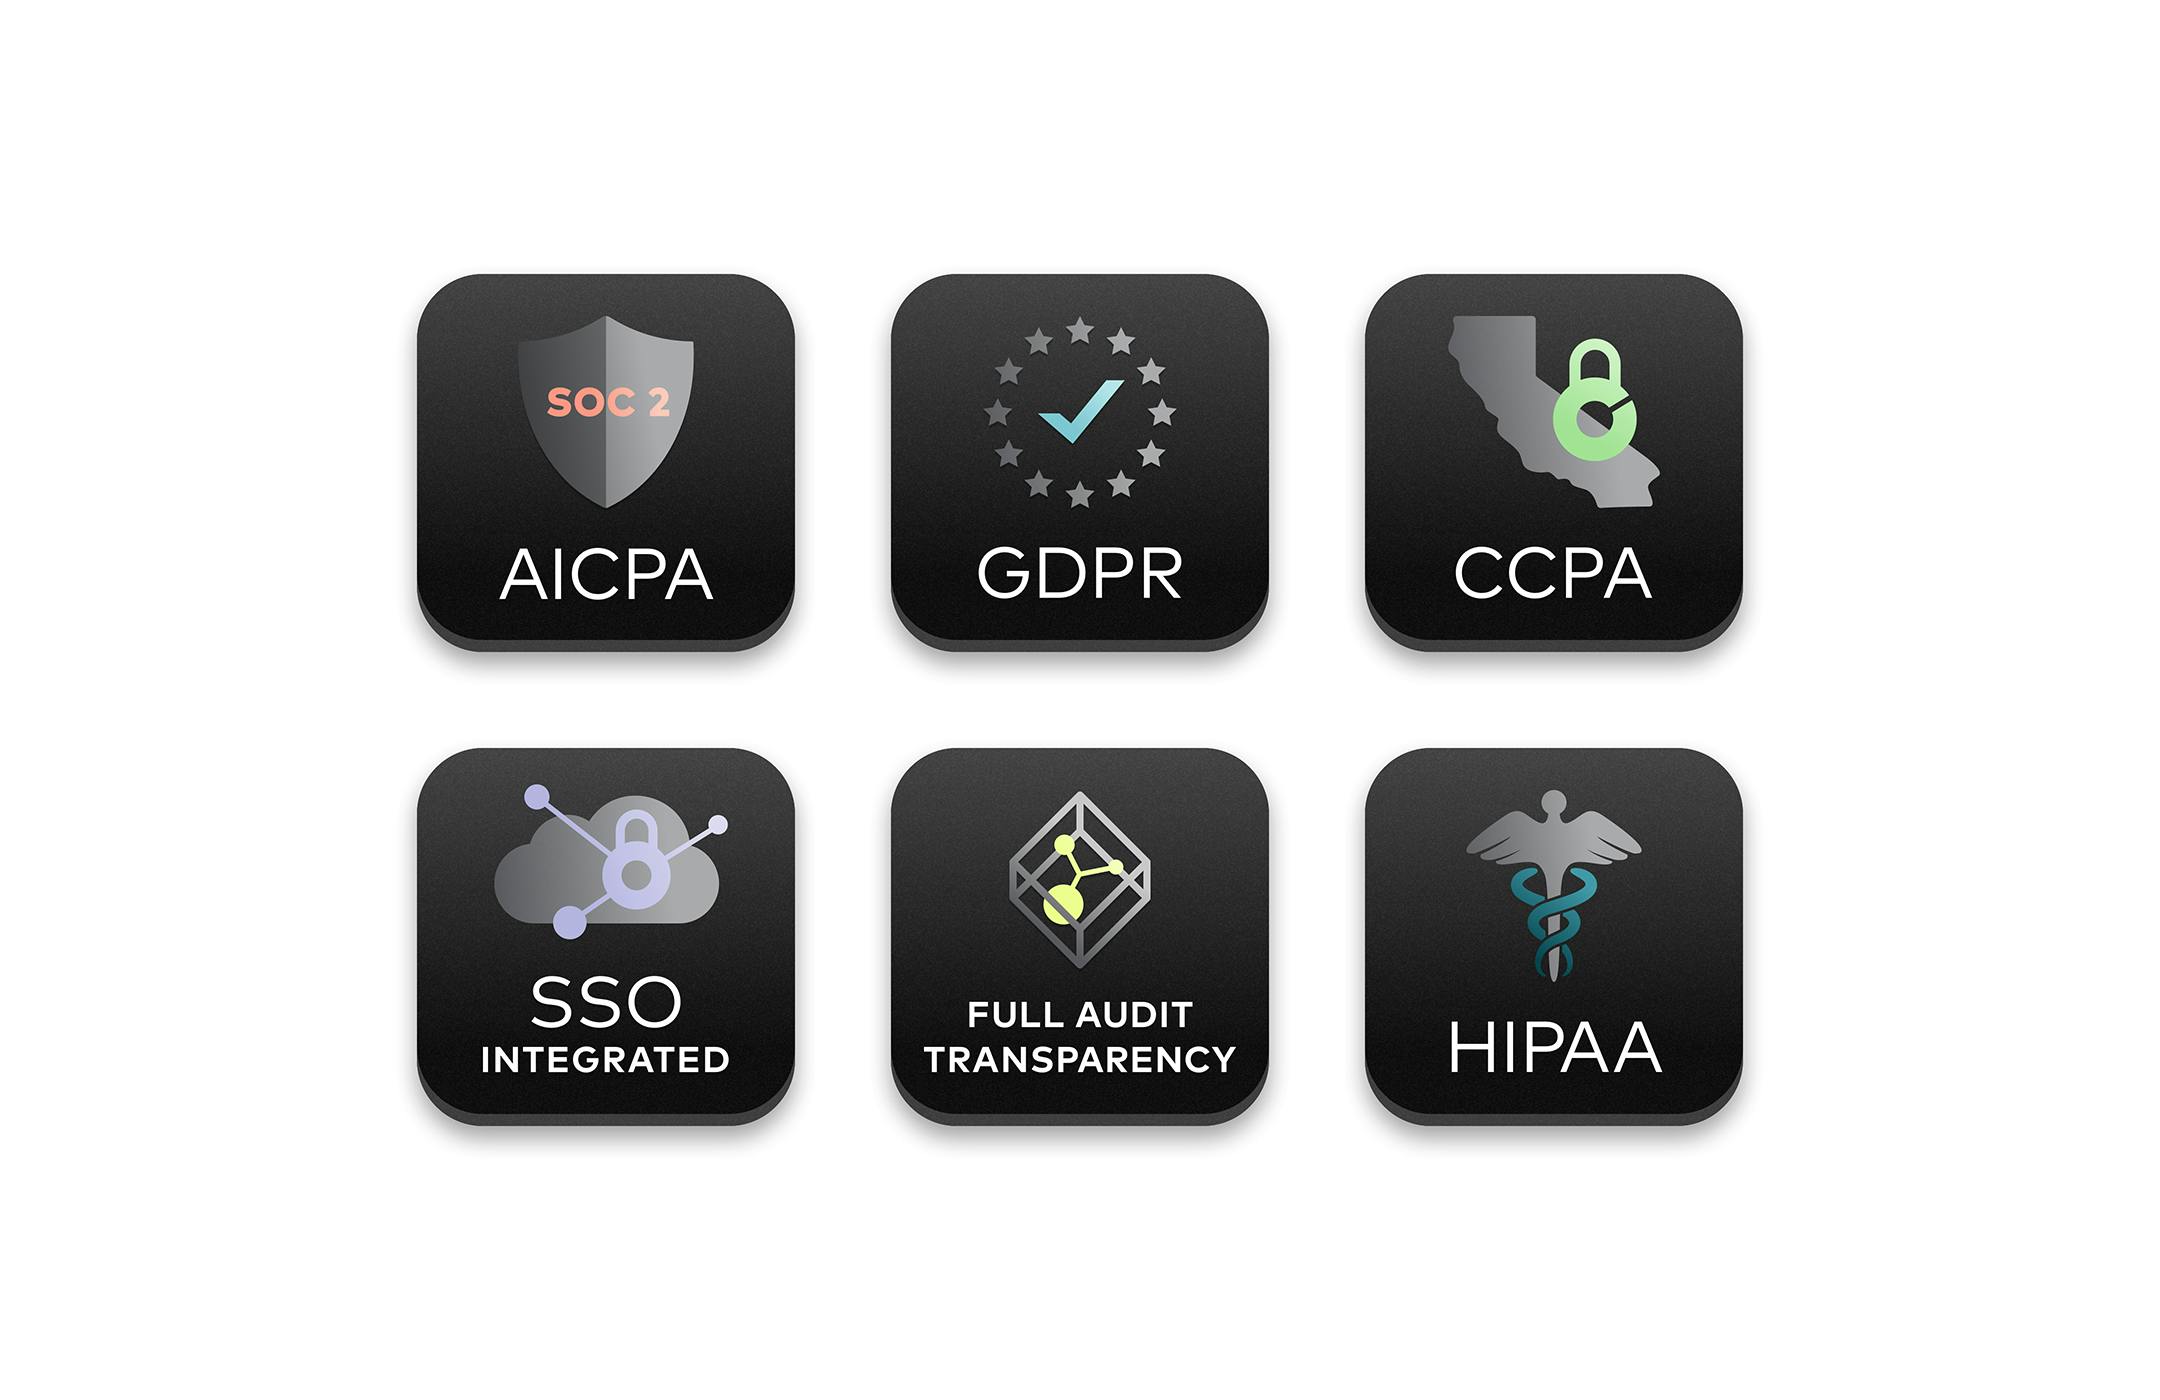 Image of 5 badges for various certificates and security features including AICPA SOC2, HIPAA, GDPR, CCPA, SSO Integrated, and Full Audit Transparency.